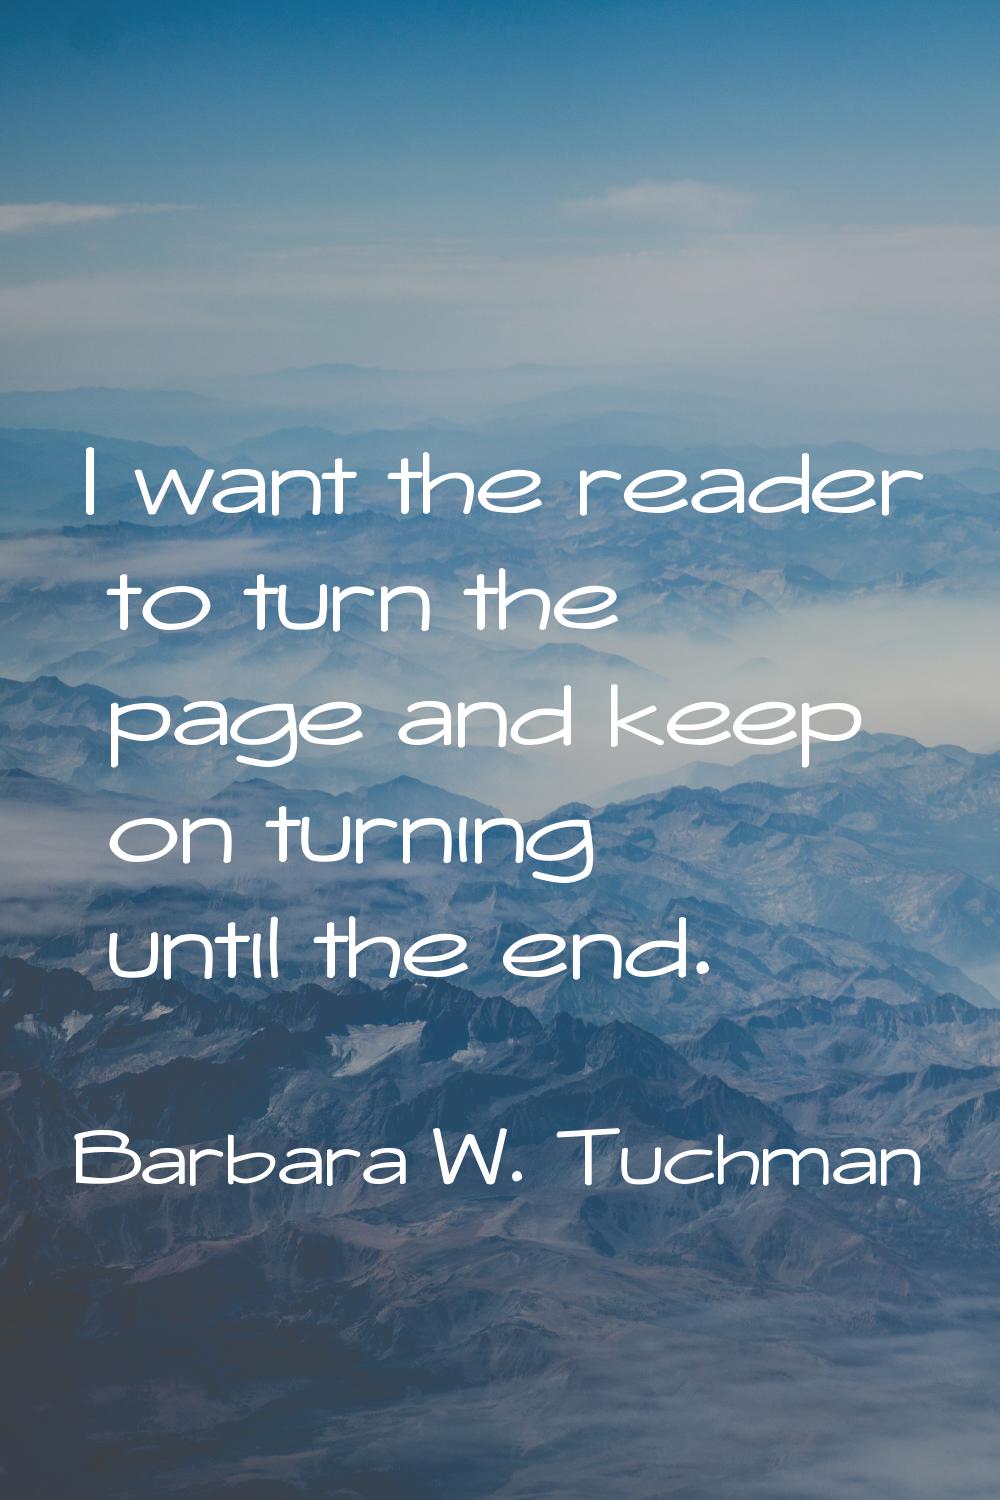 I want the reader to turn the page and keep on turning until the end.